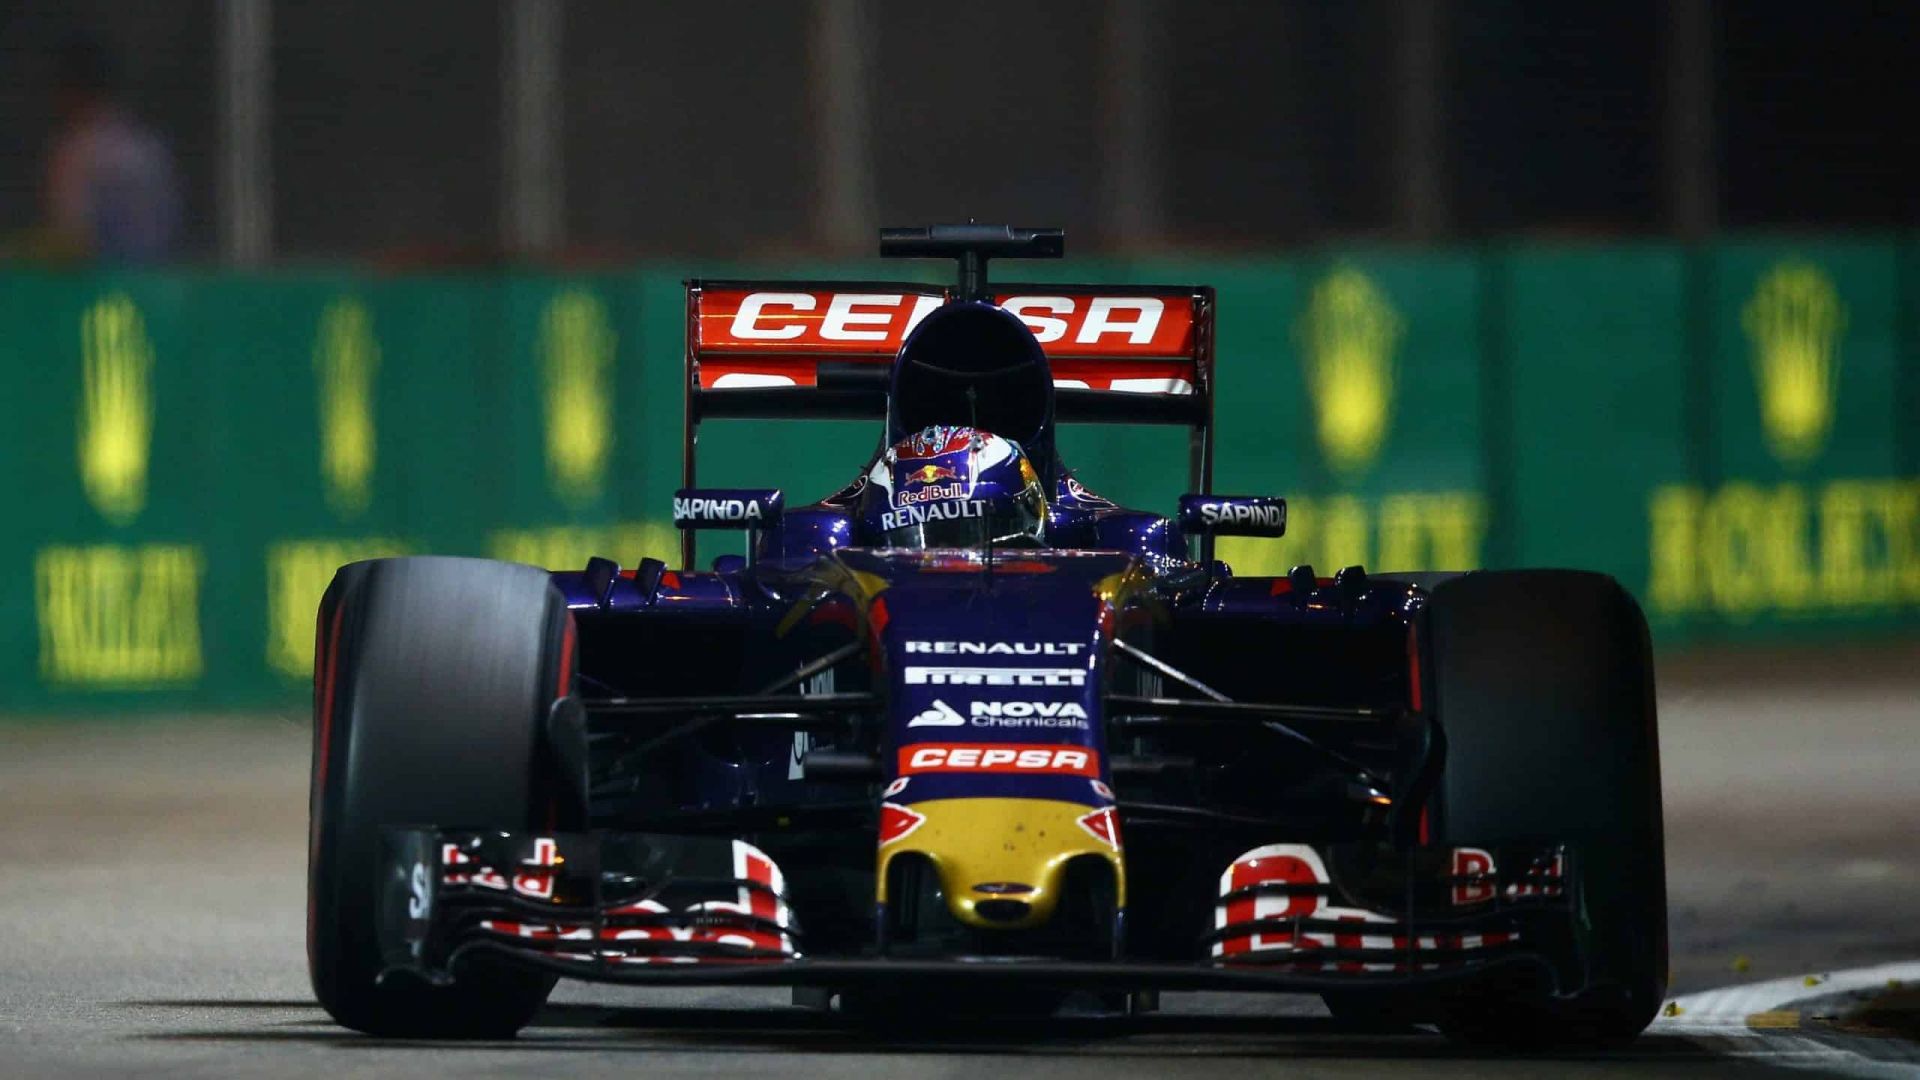 2015 Singapore Grand Prix - Max Verstappen (image courtesy Red Bull Content Pool)